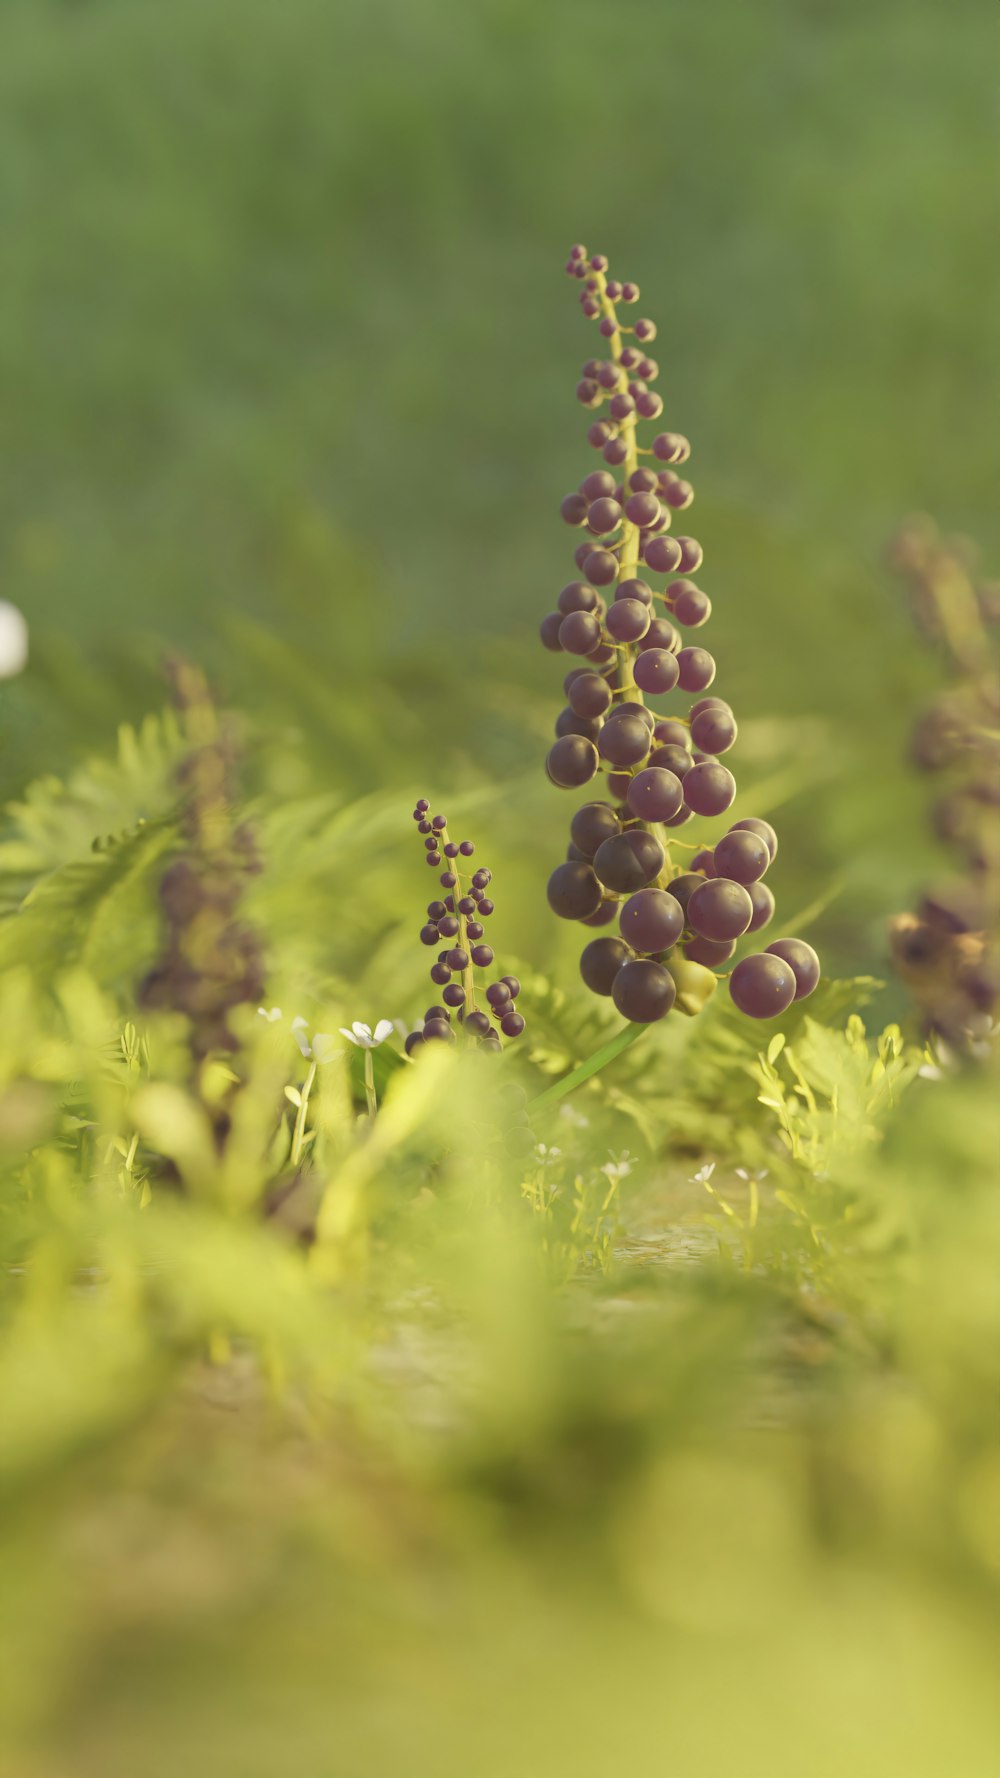 a close up of a bunch of grapes on a plant